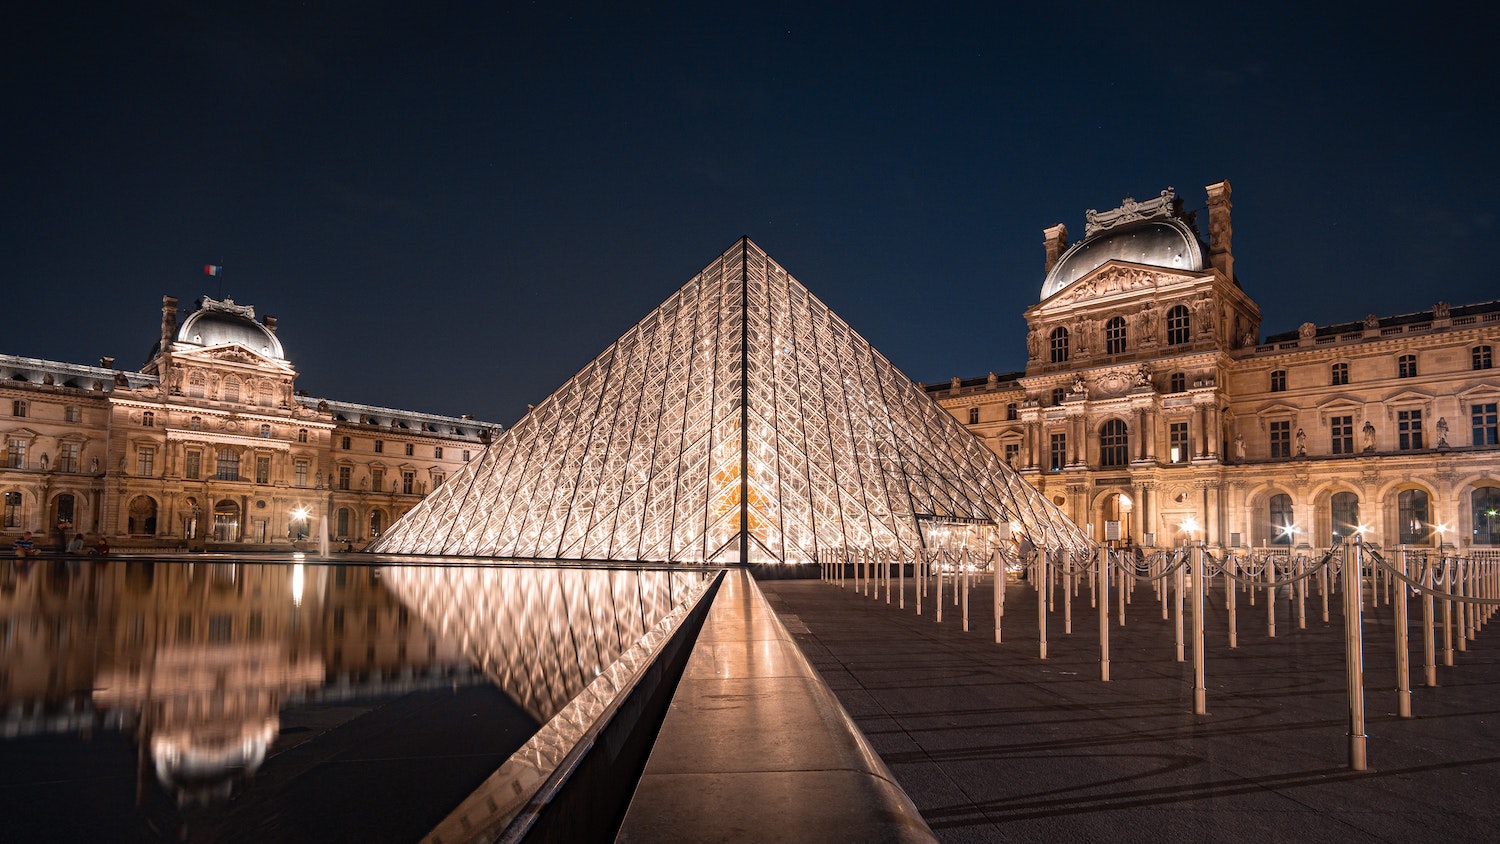 Musee de Louvre at night_Image by Michael-Fousert Unsplash